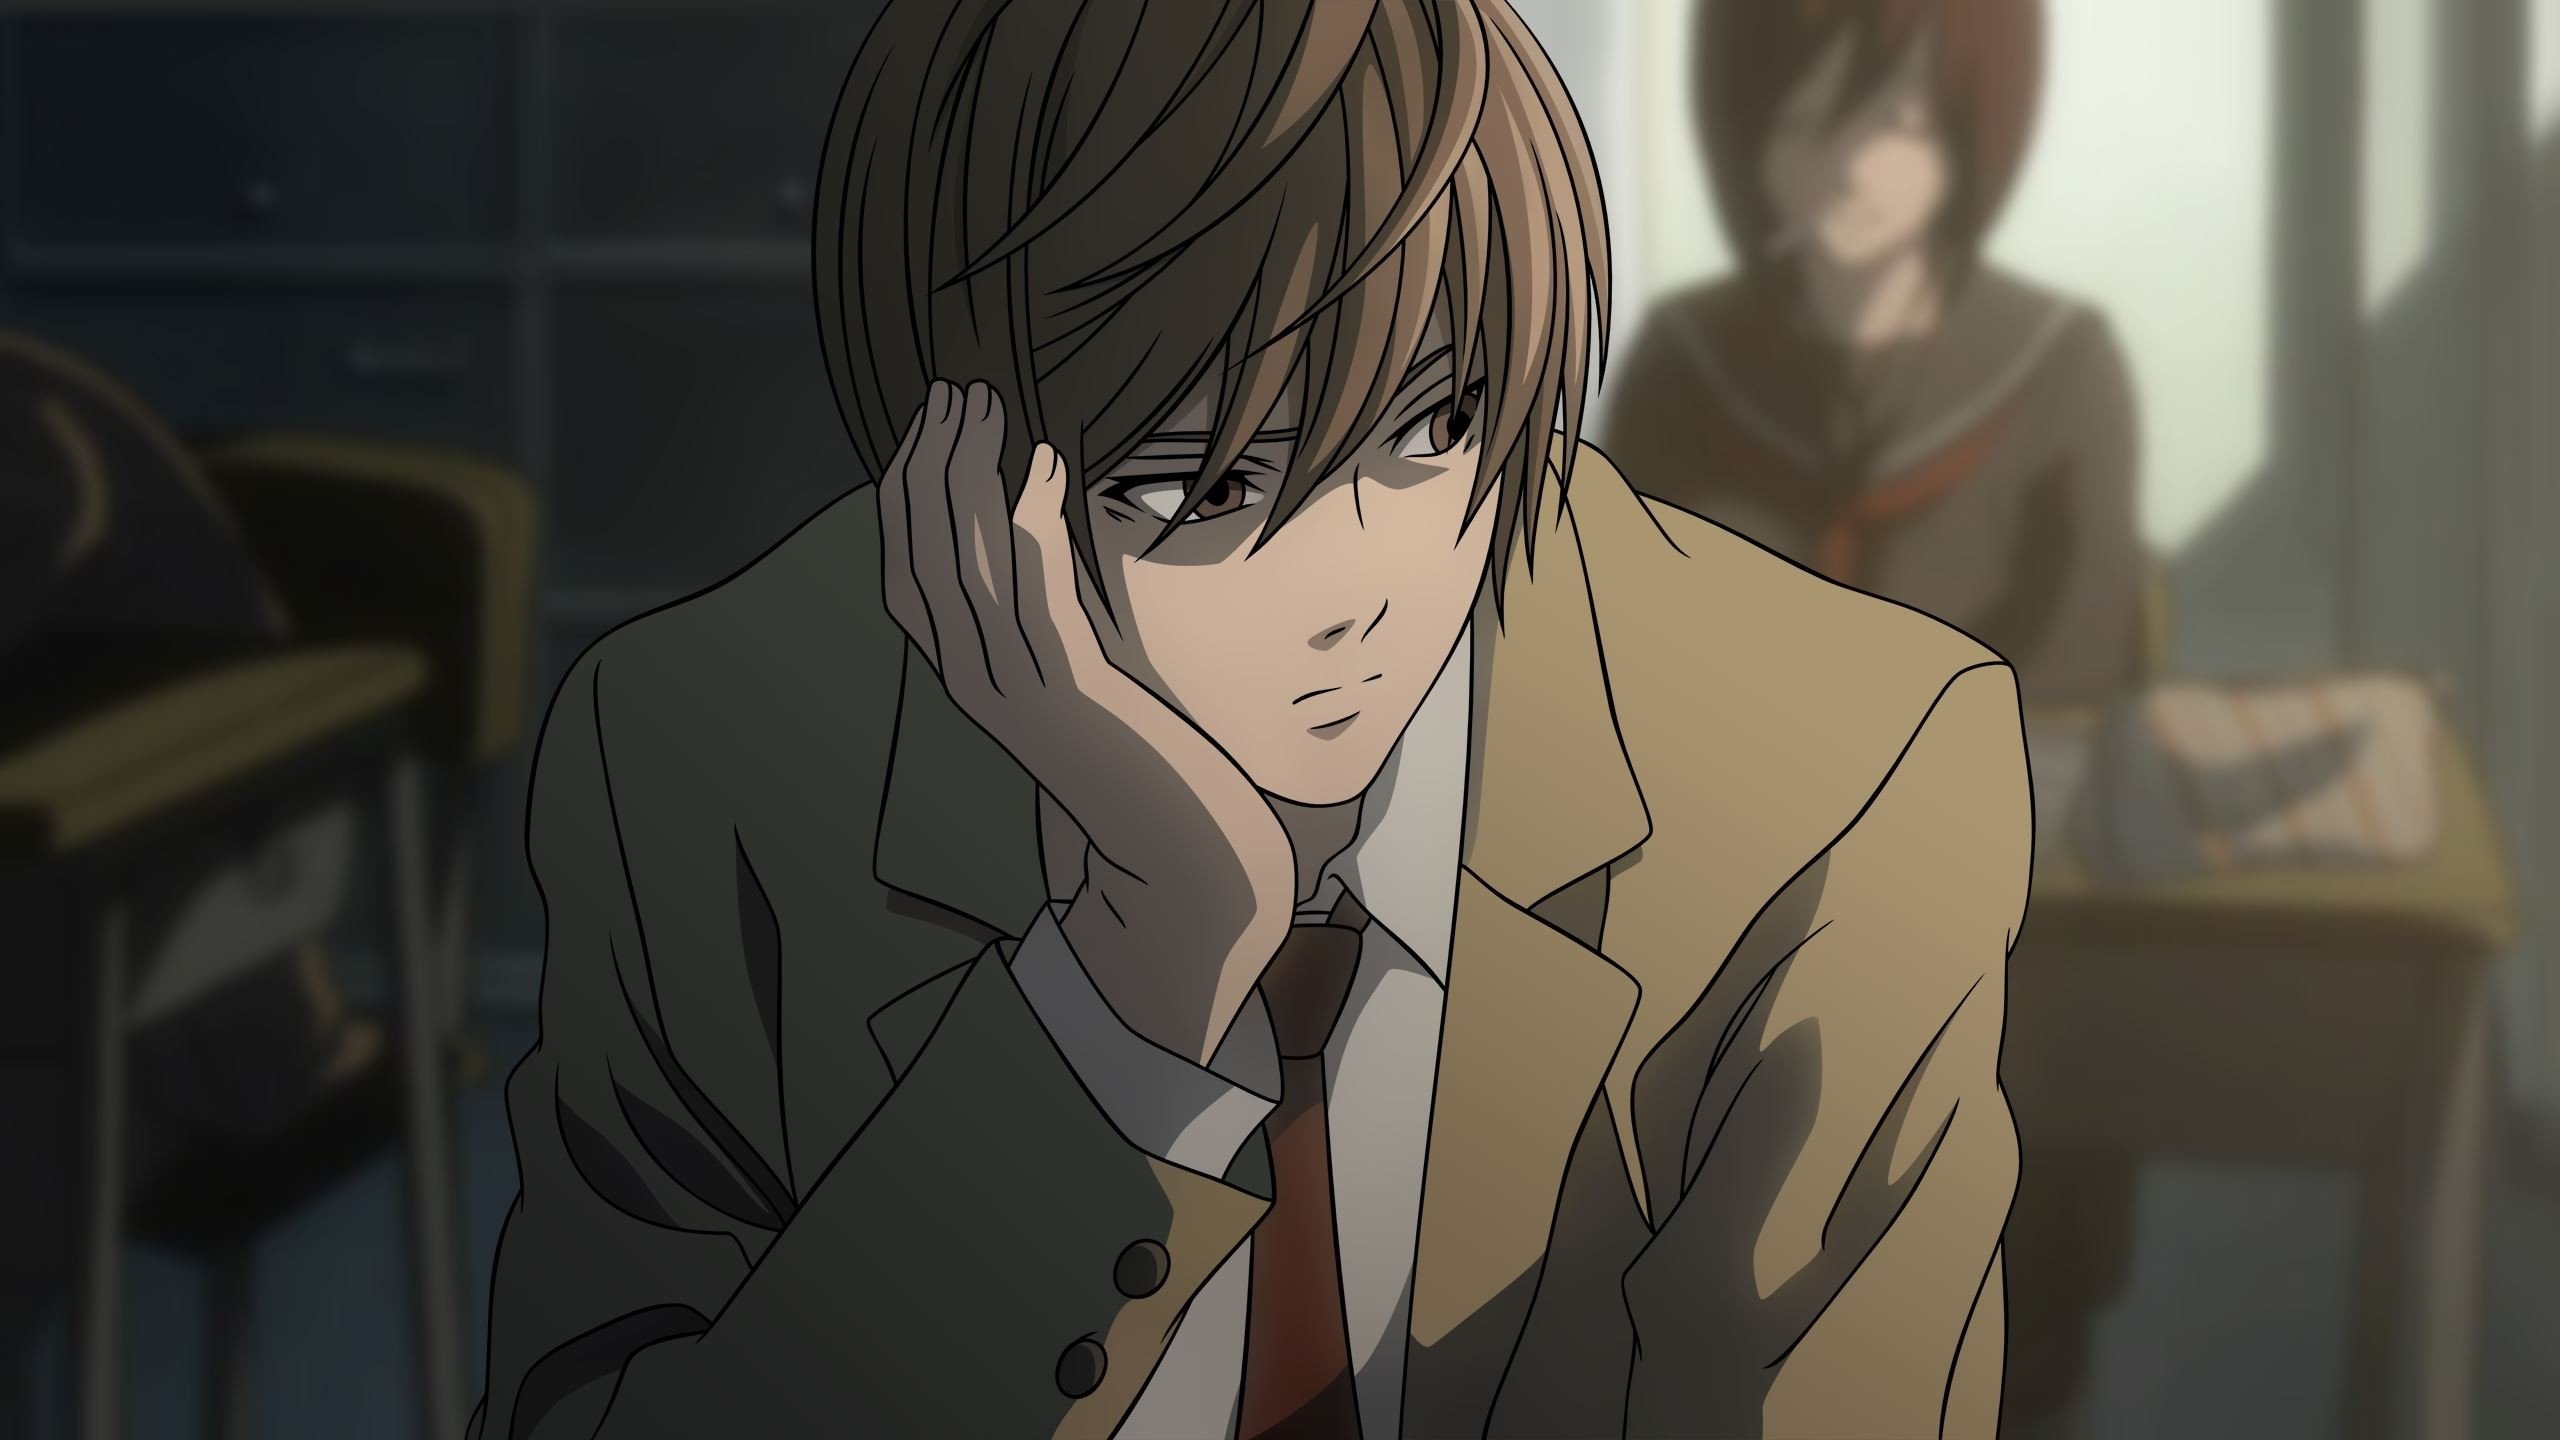 anime, Series, Character, Death, Note, Light, Yagami, Classroom Wallpaper